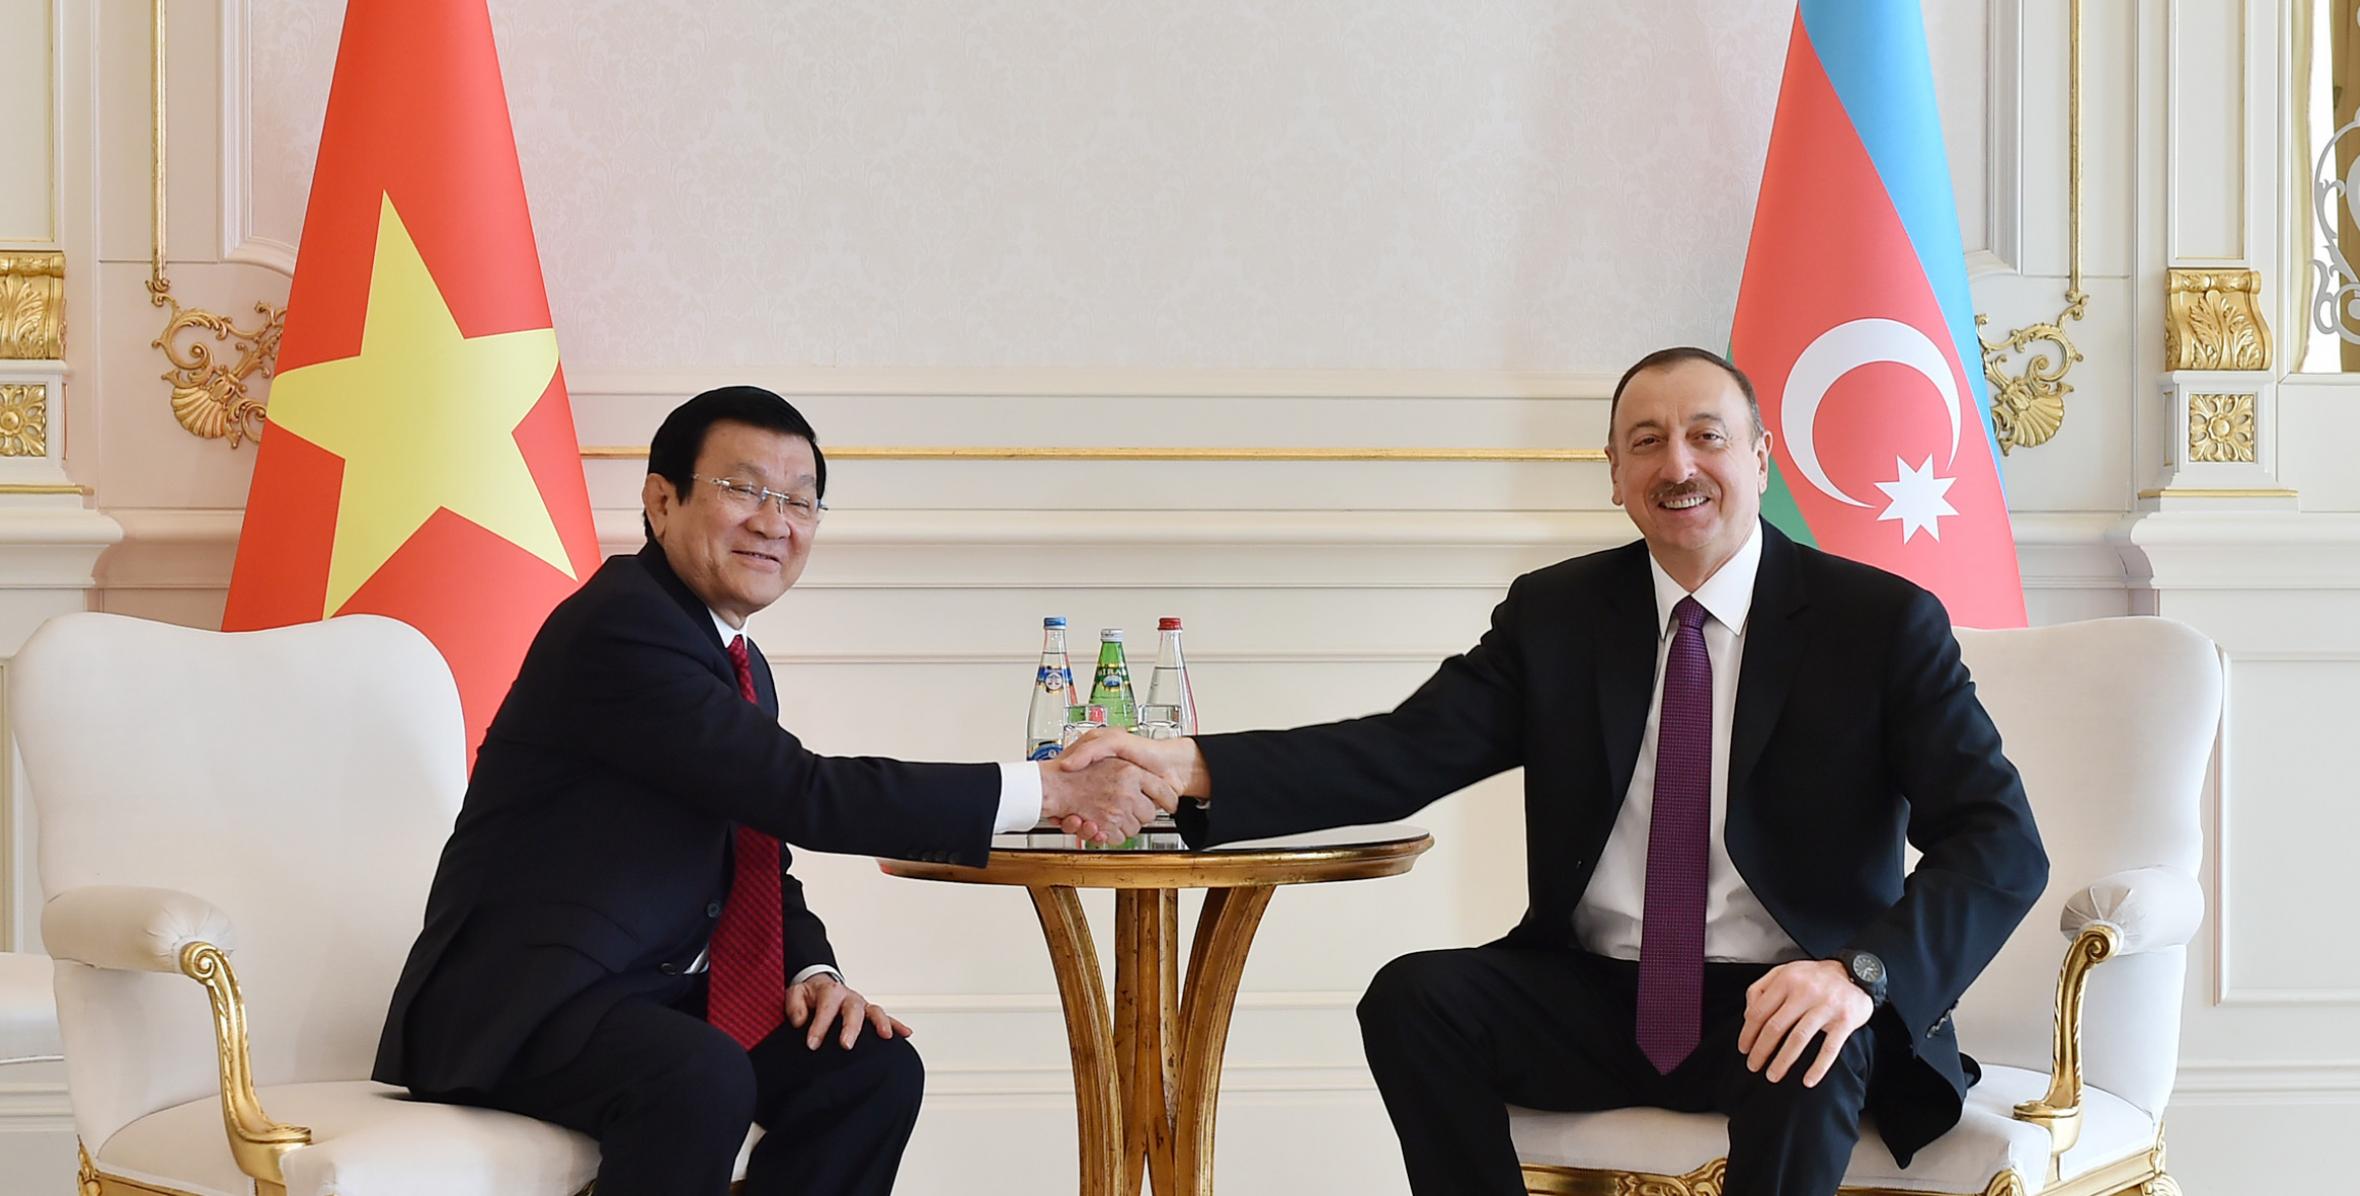 Ilham Aliyev and President of Vietnam Truong Tan Sang held a one-on-one meeting